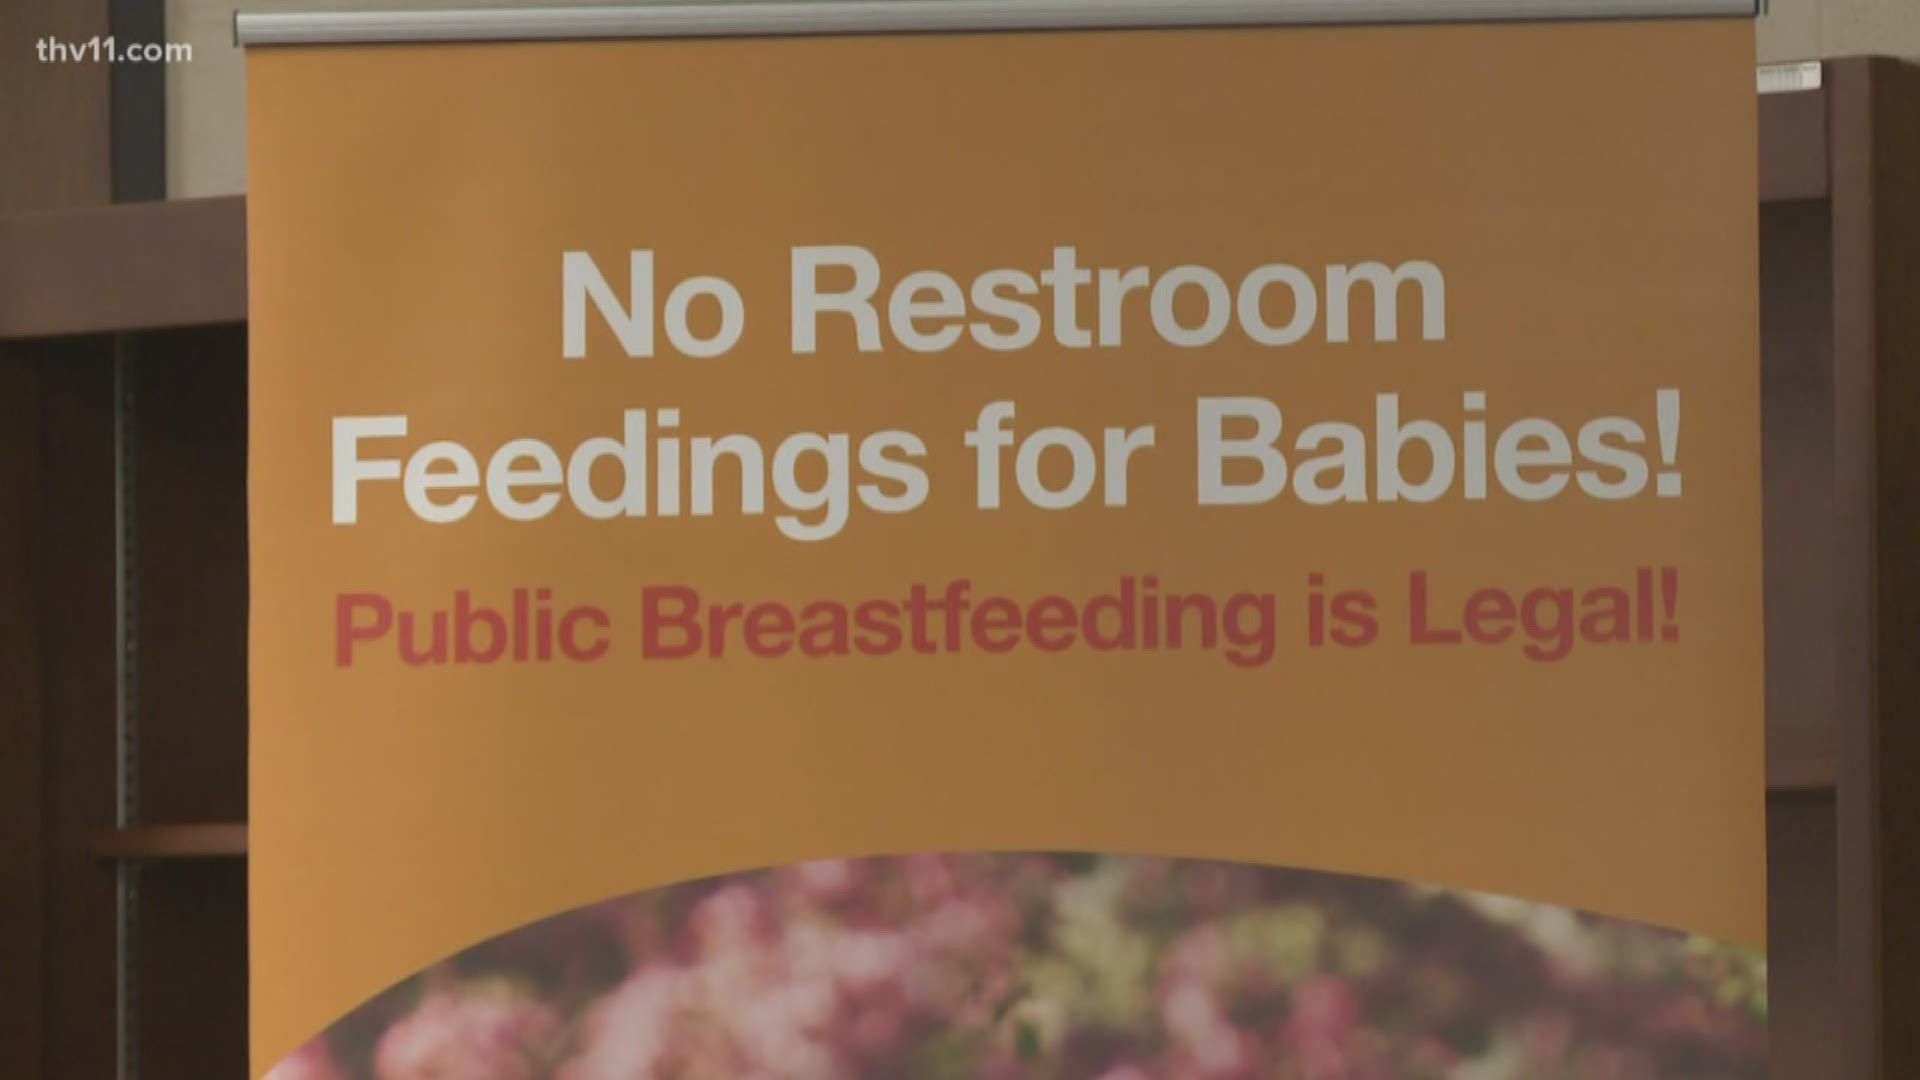 Find the support to breastfeed can be difficult for African-American women. In an effort to change that, the University of Arkansas in Pine Bluff opened its first breastfeeding room.